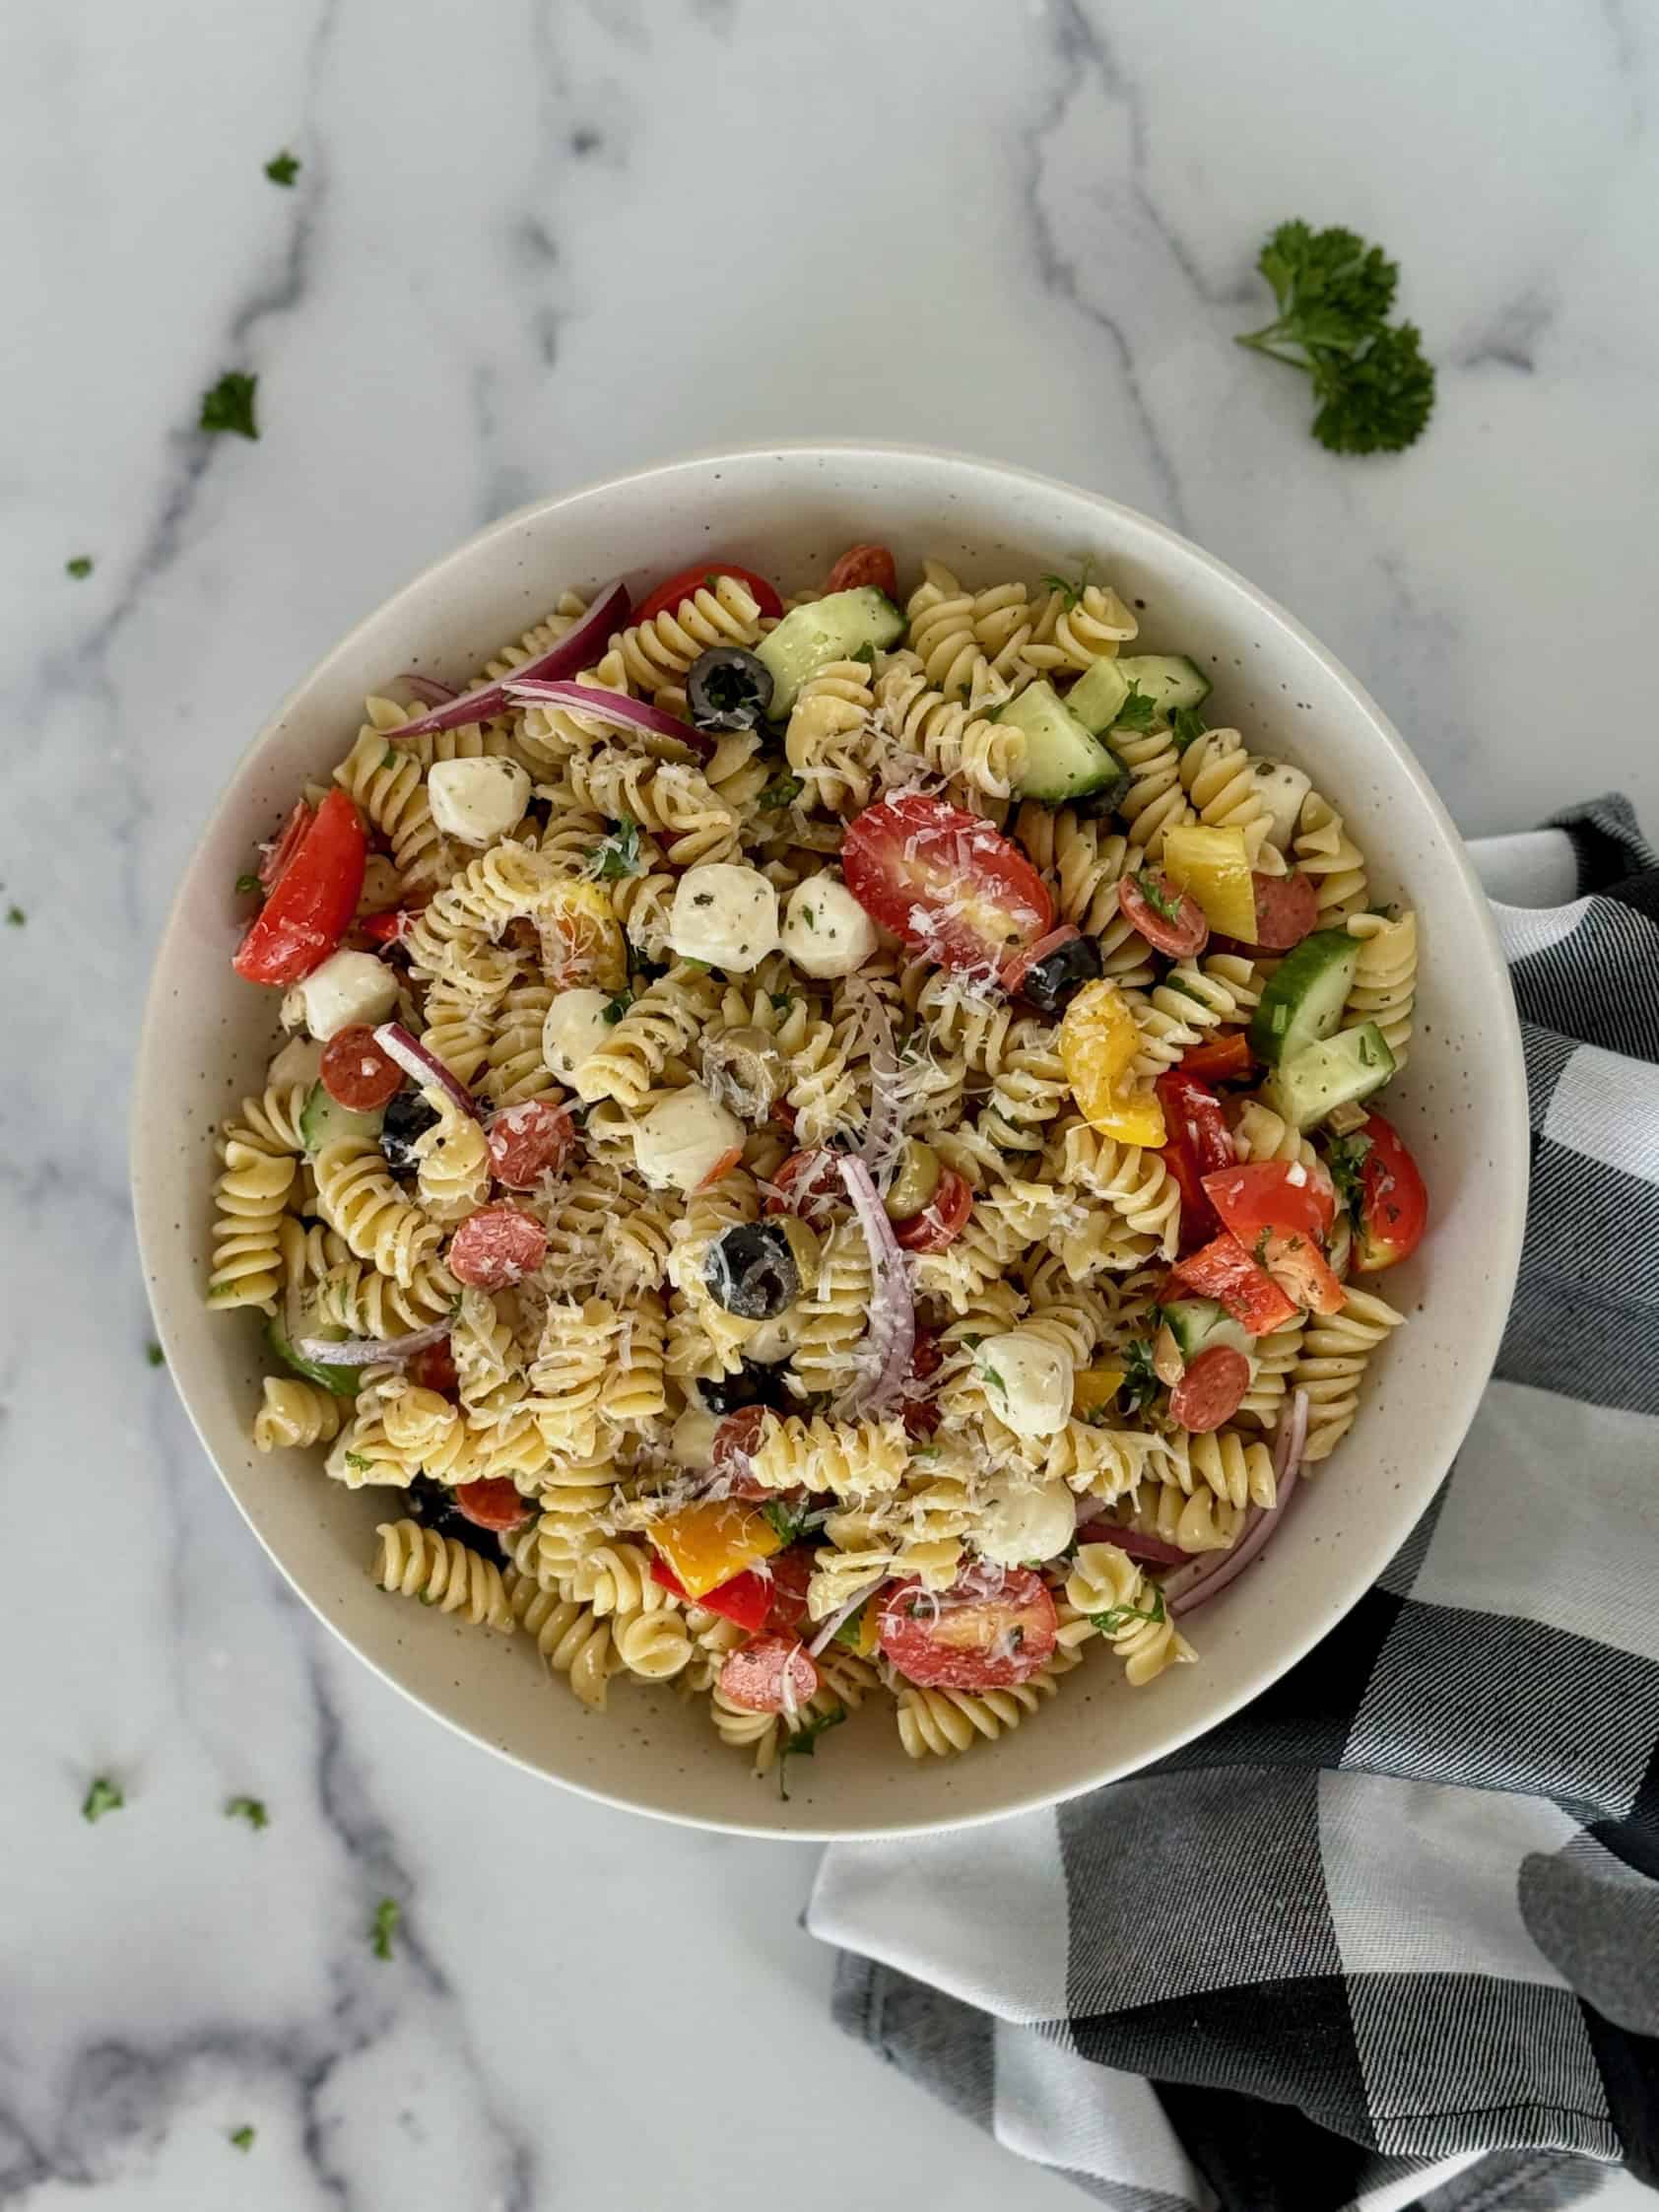 A close-up showcasing rotini pasta, cherry tomatoes, bell peppers, cucumber, red onion, black olives, and mozzarella cheese balls, garnished with fresh herbs.